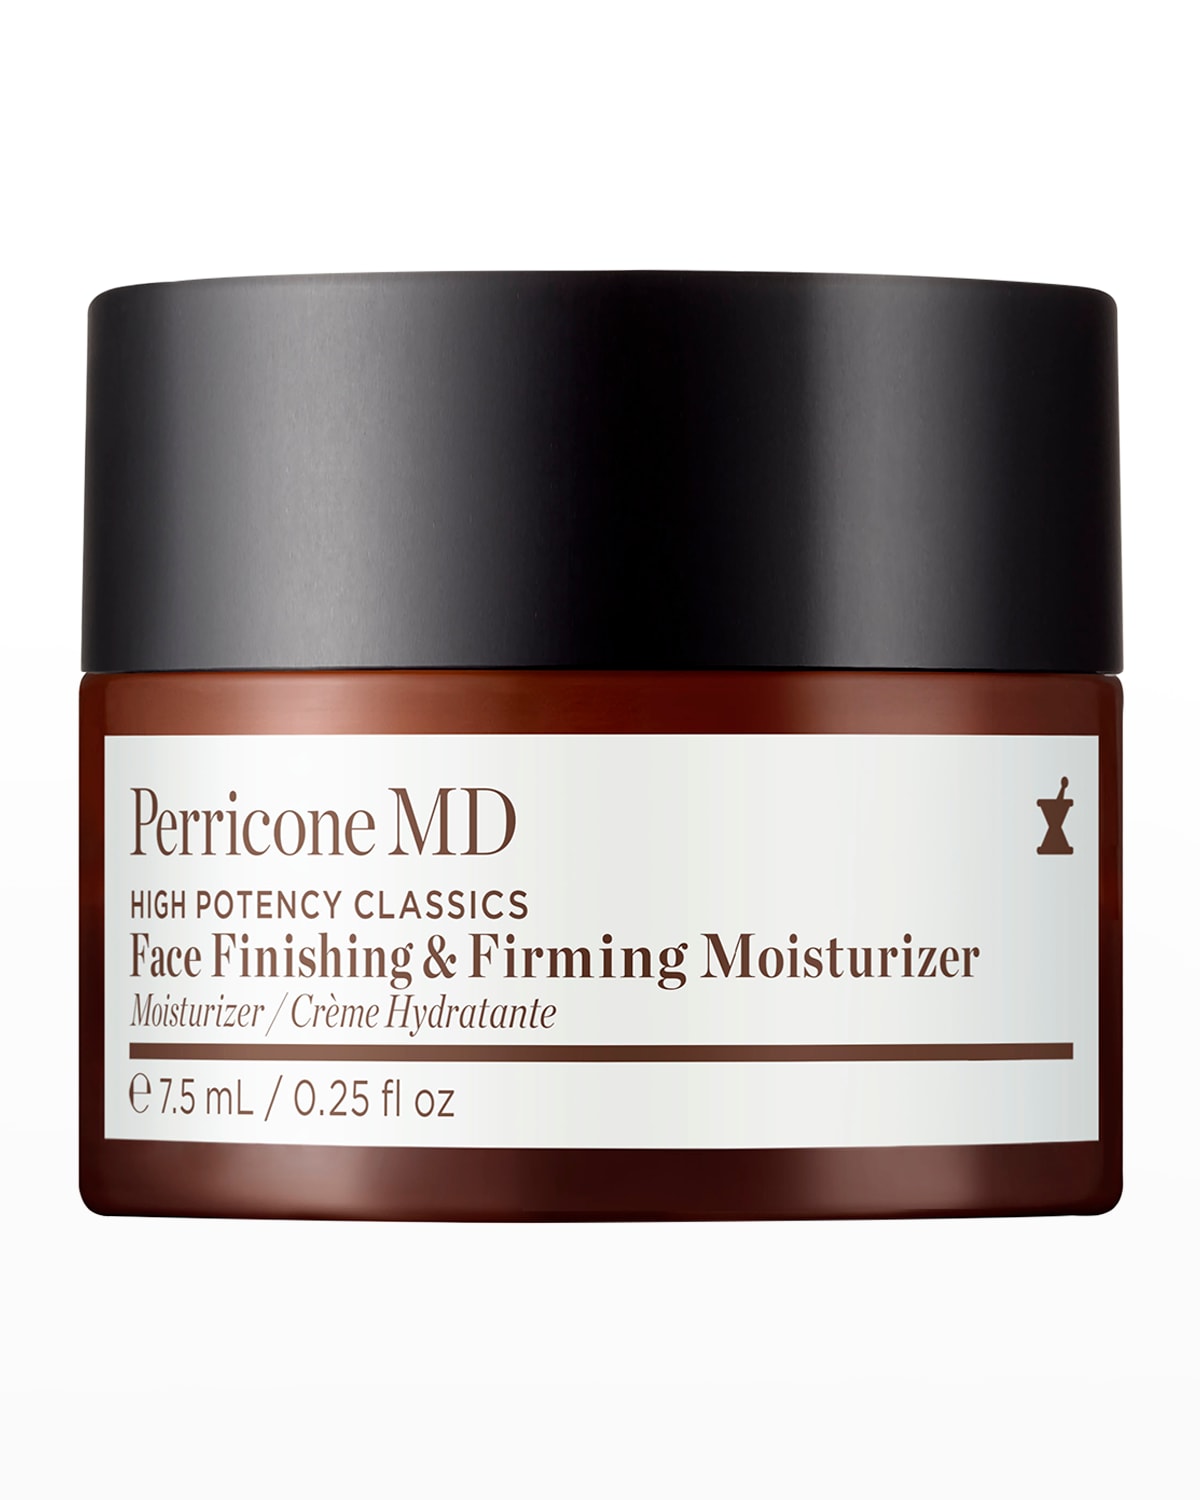 High Potency Classics Face Finishing & Firming Moisturizer Deluxe Sample, Yours with any $69 Perricone MD Purchase